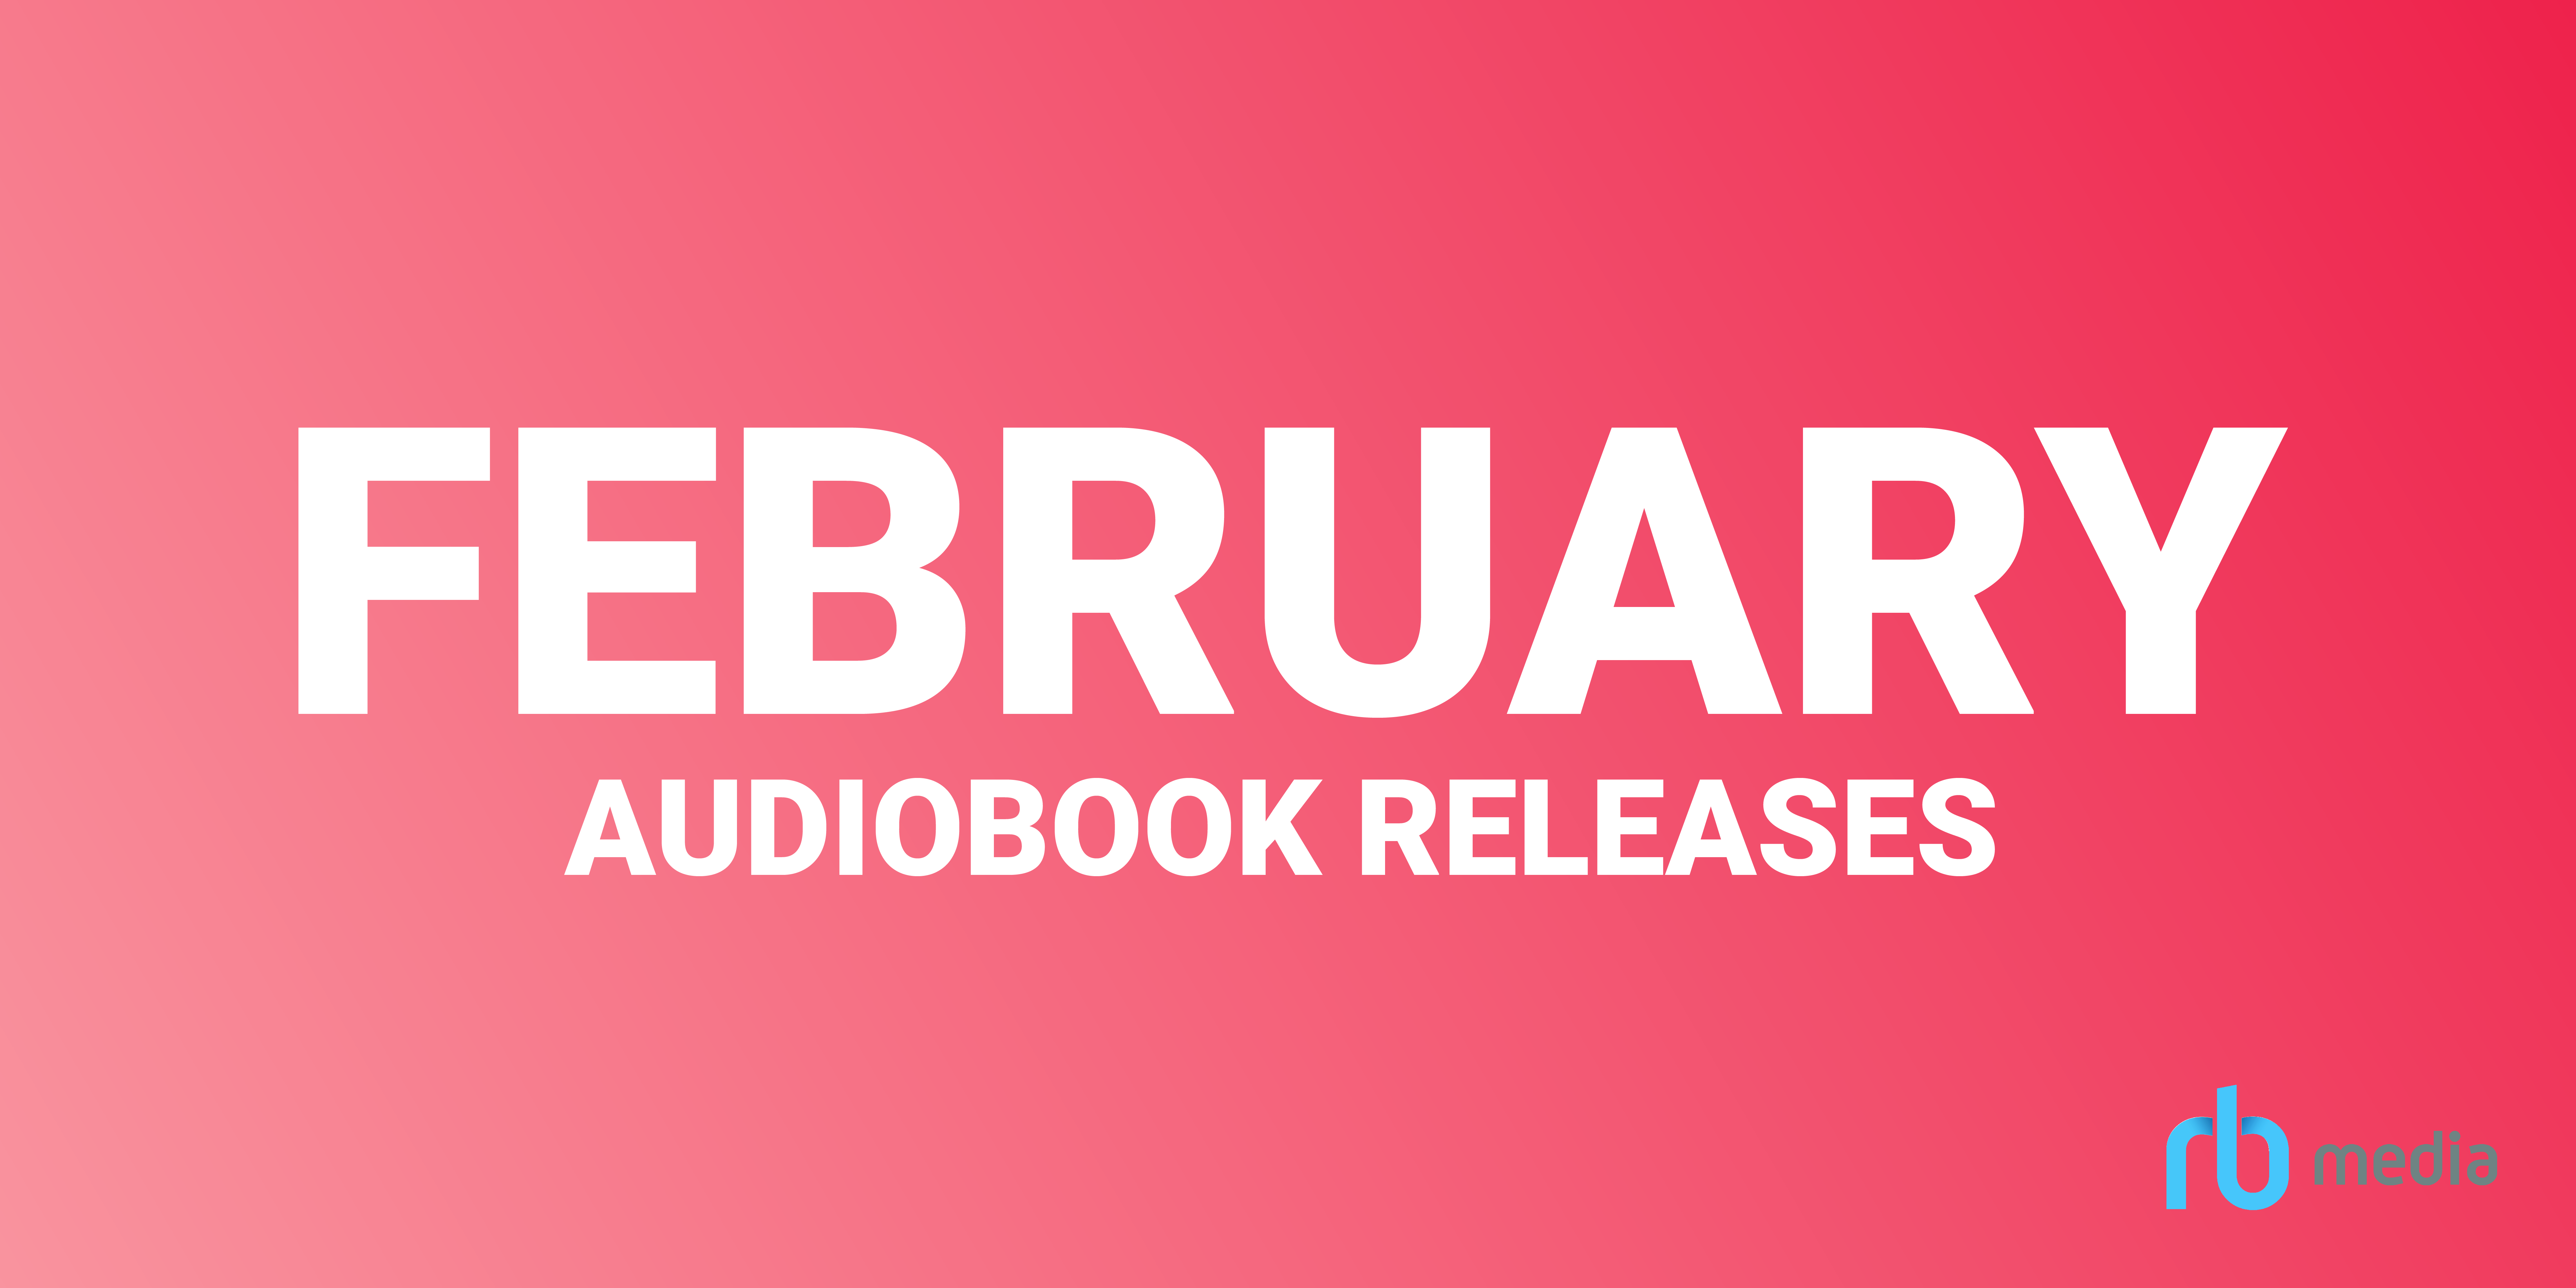 February Releases